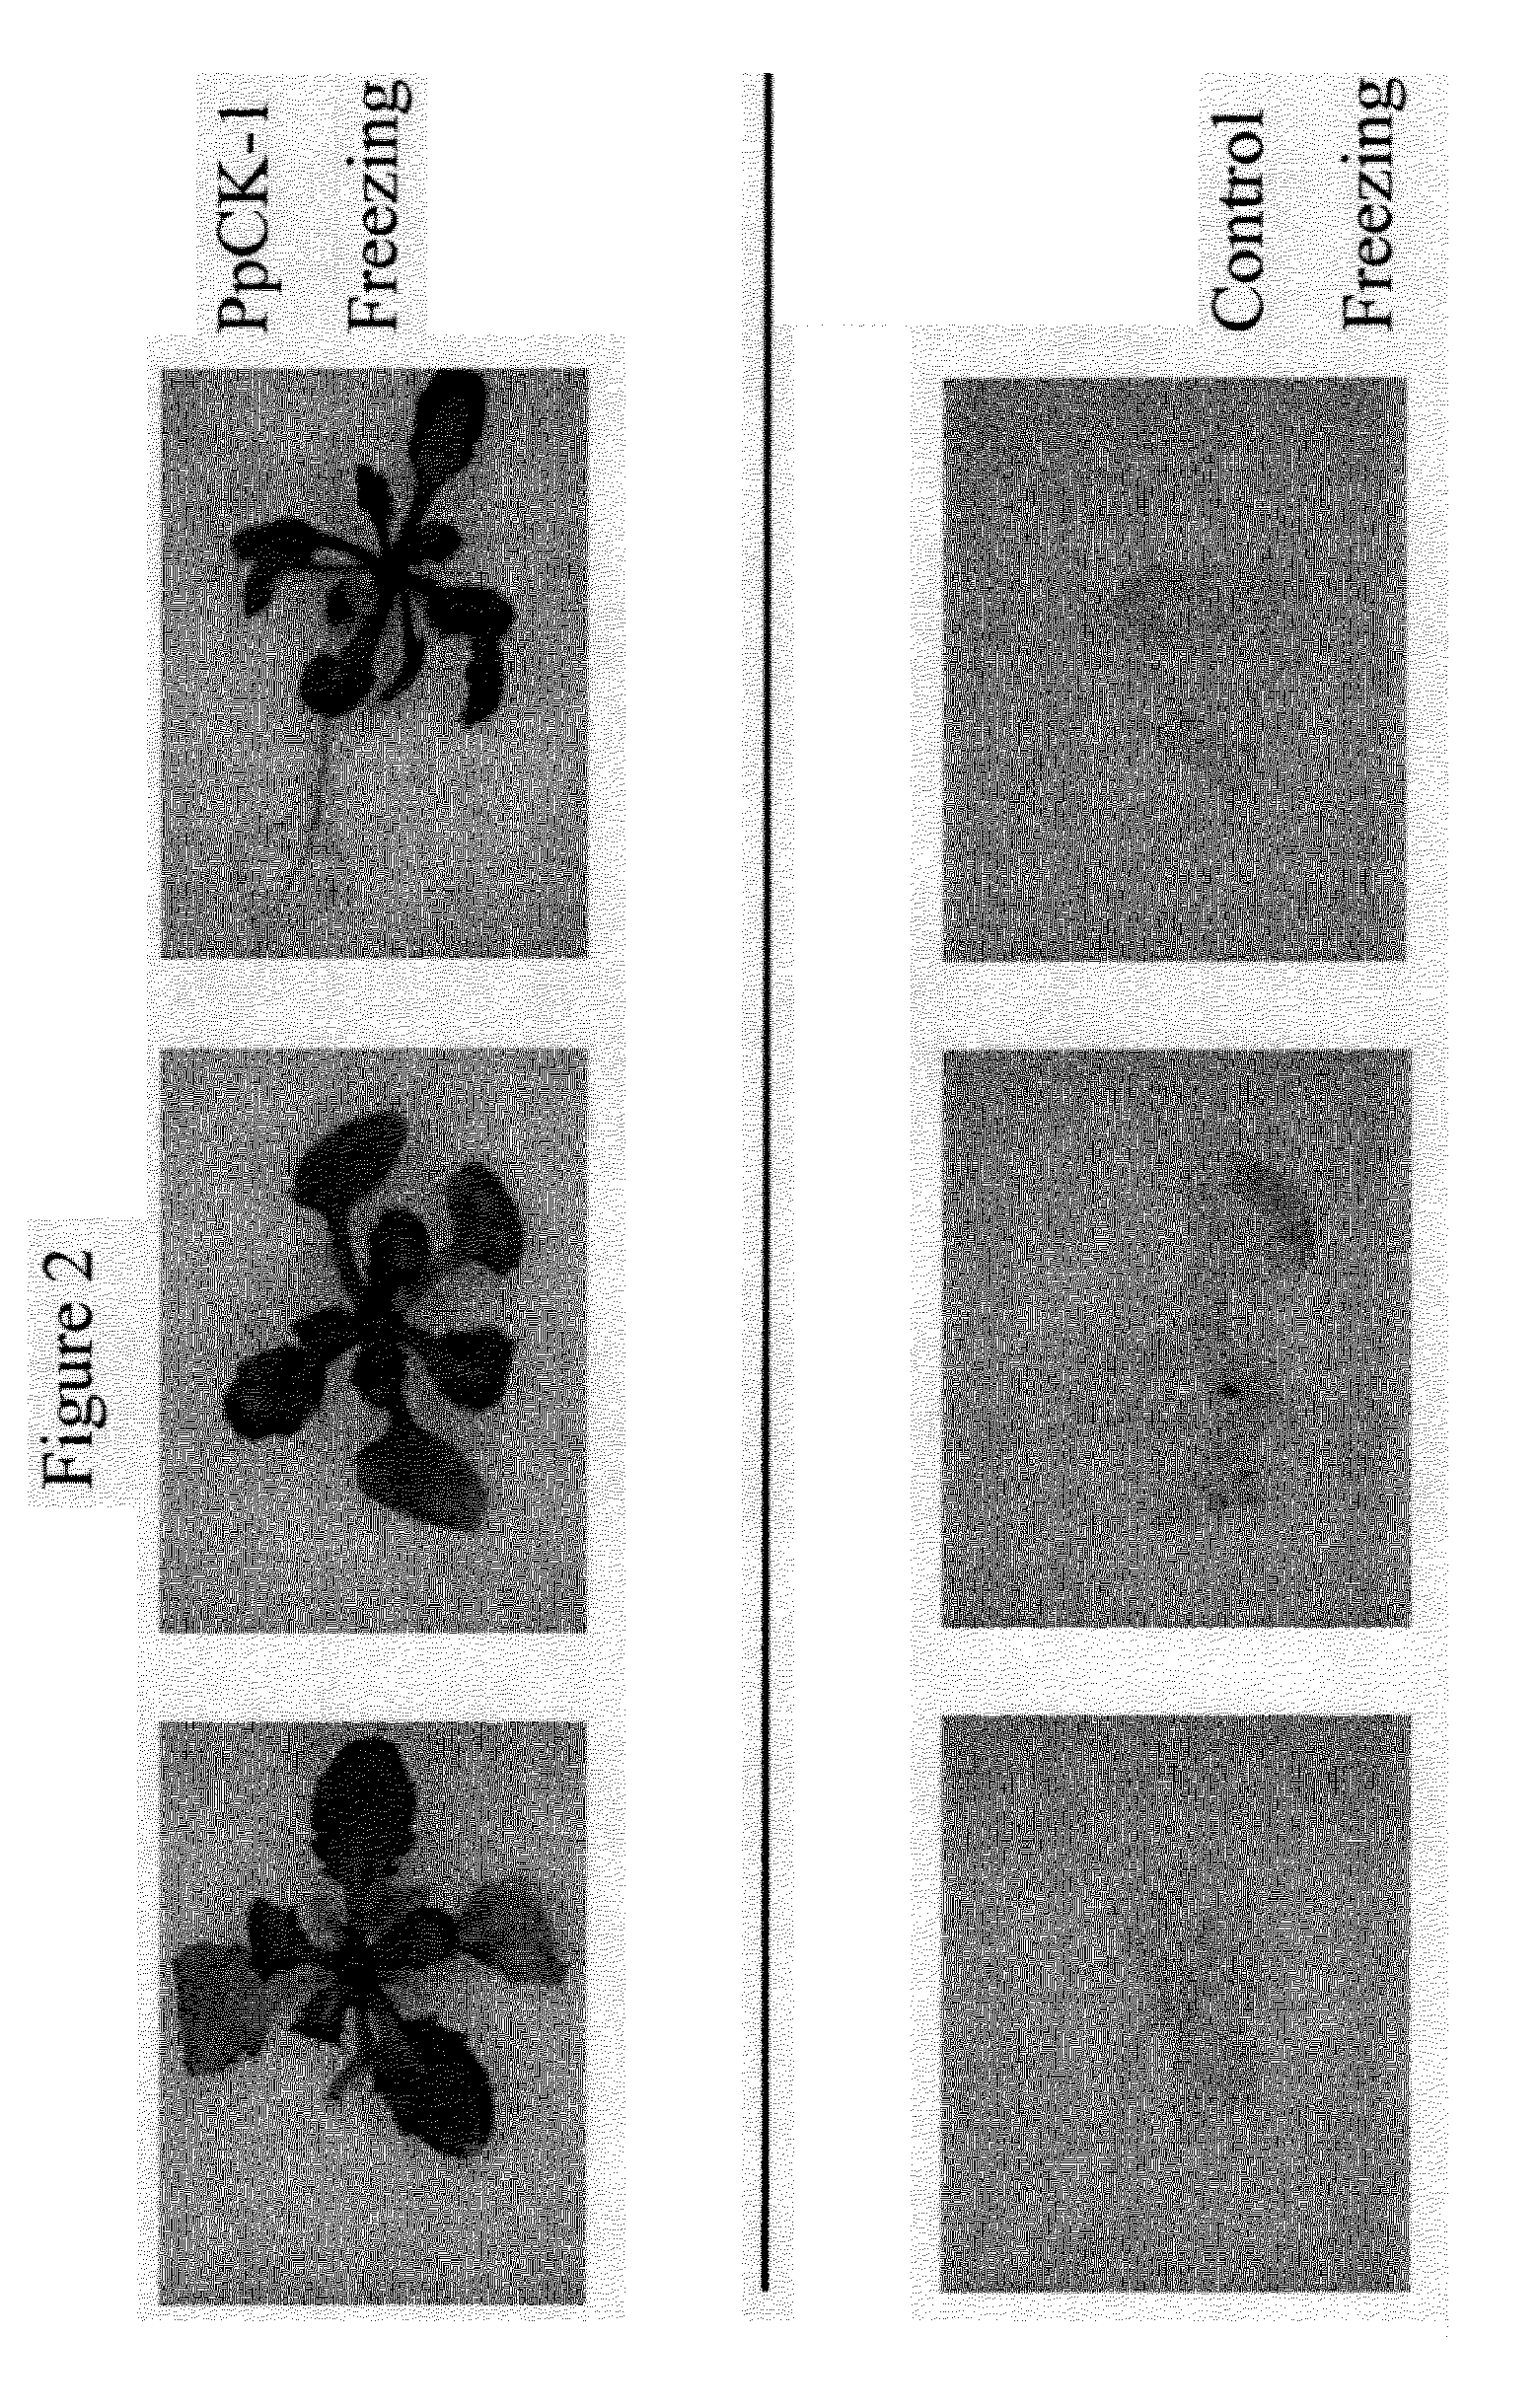 Casein kinase stress-related polypeptides and methods of use in plants